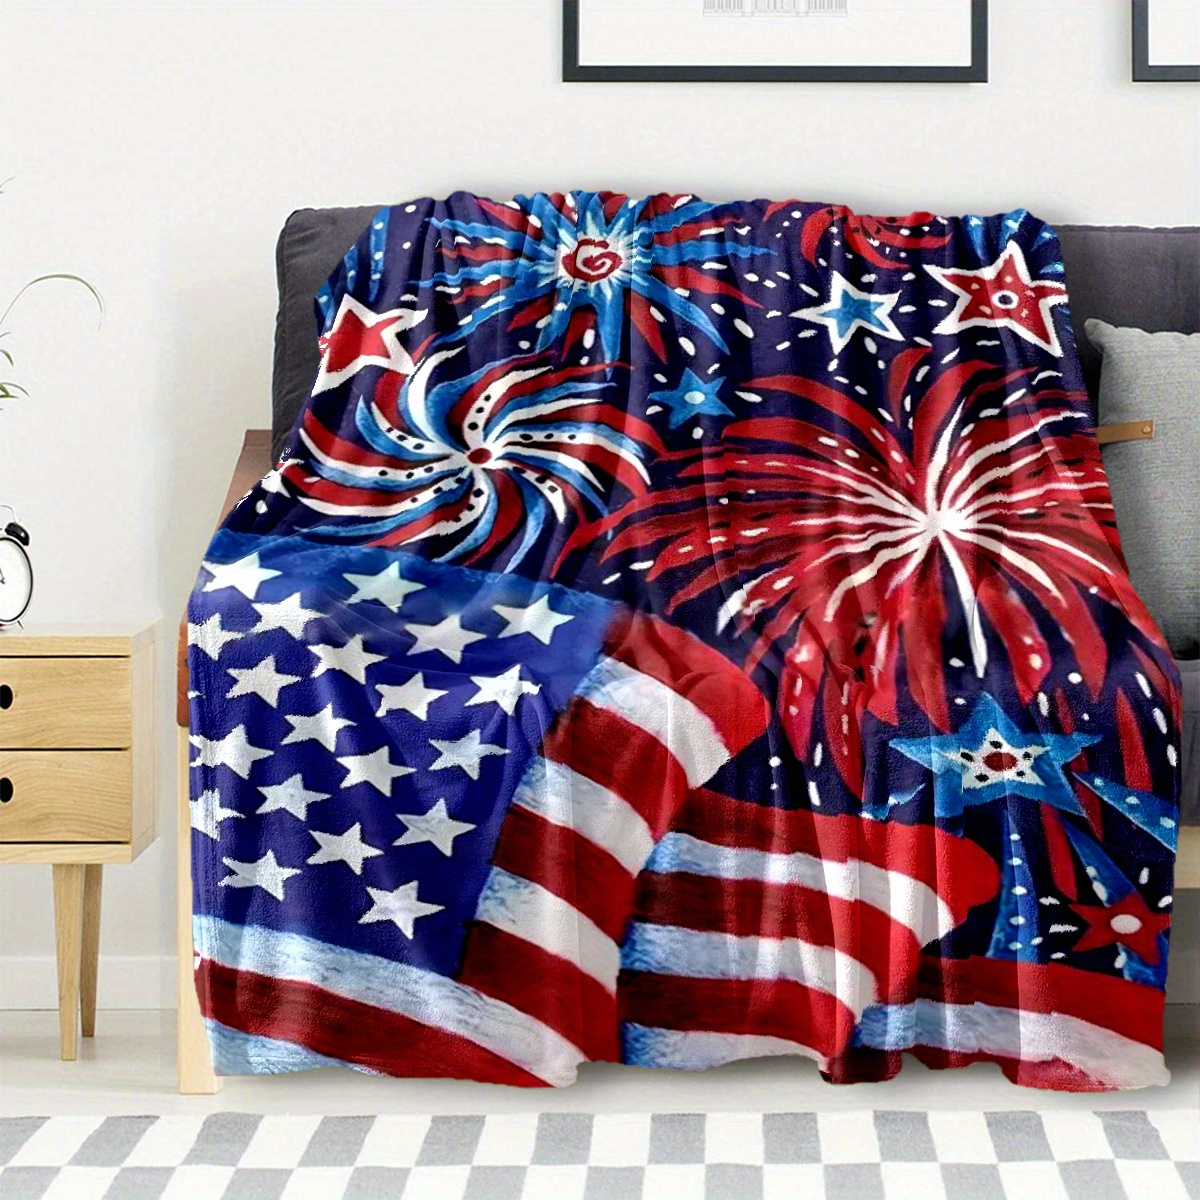 

1pc Patriotic Stars Stripes Firework Blanket - 100% Polyester Cozy Soft Sofa Throw - Large Warm All-season American Flag Design Blanket For Couch, Bed, Travel - Fits Areas ≥ 2.16m², With ≥1.8m Side